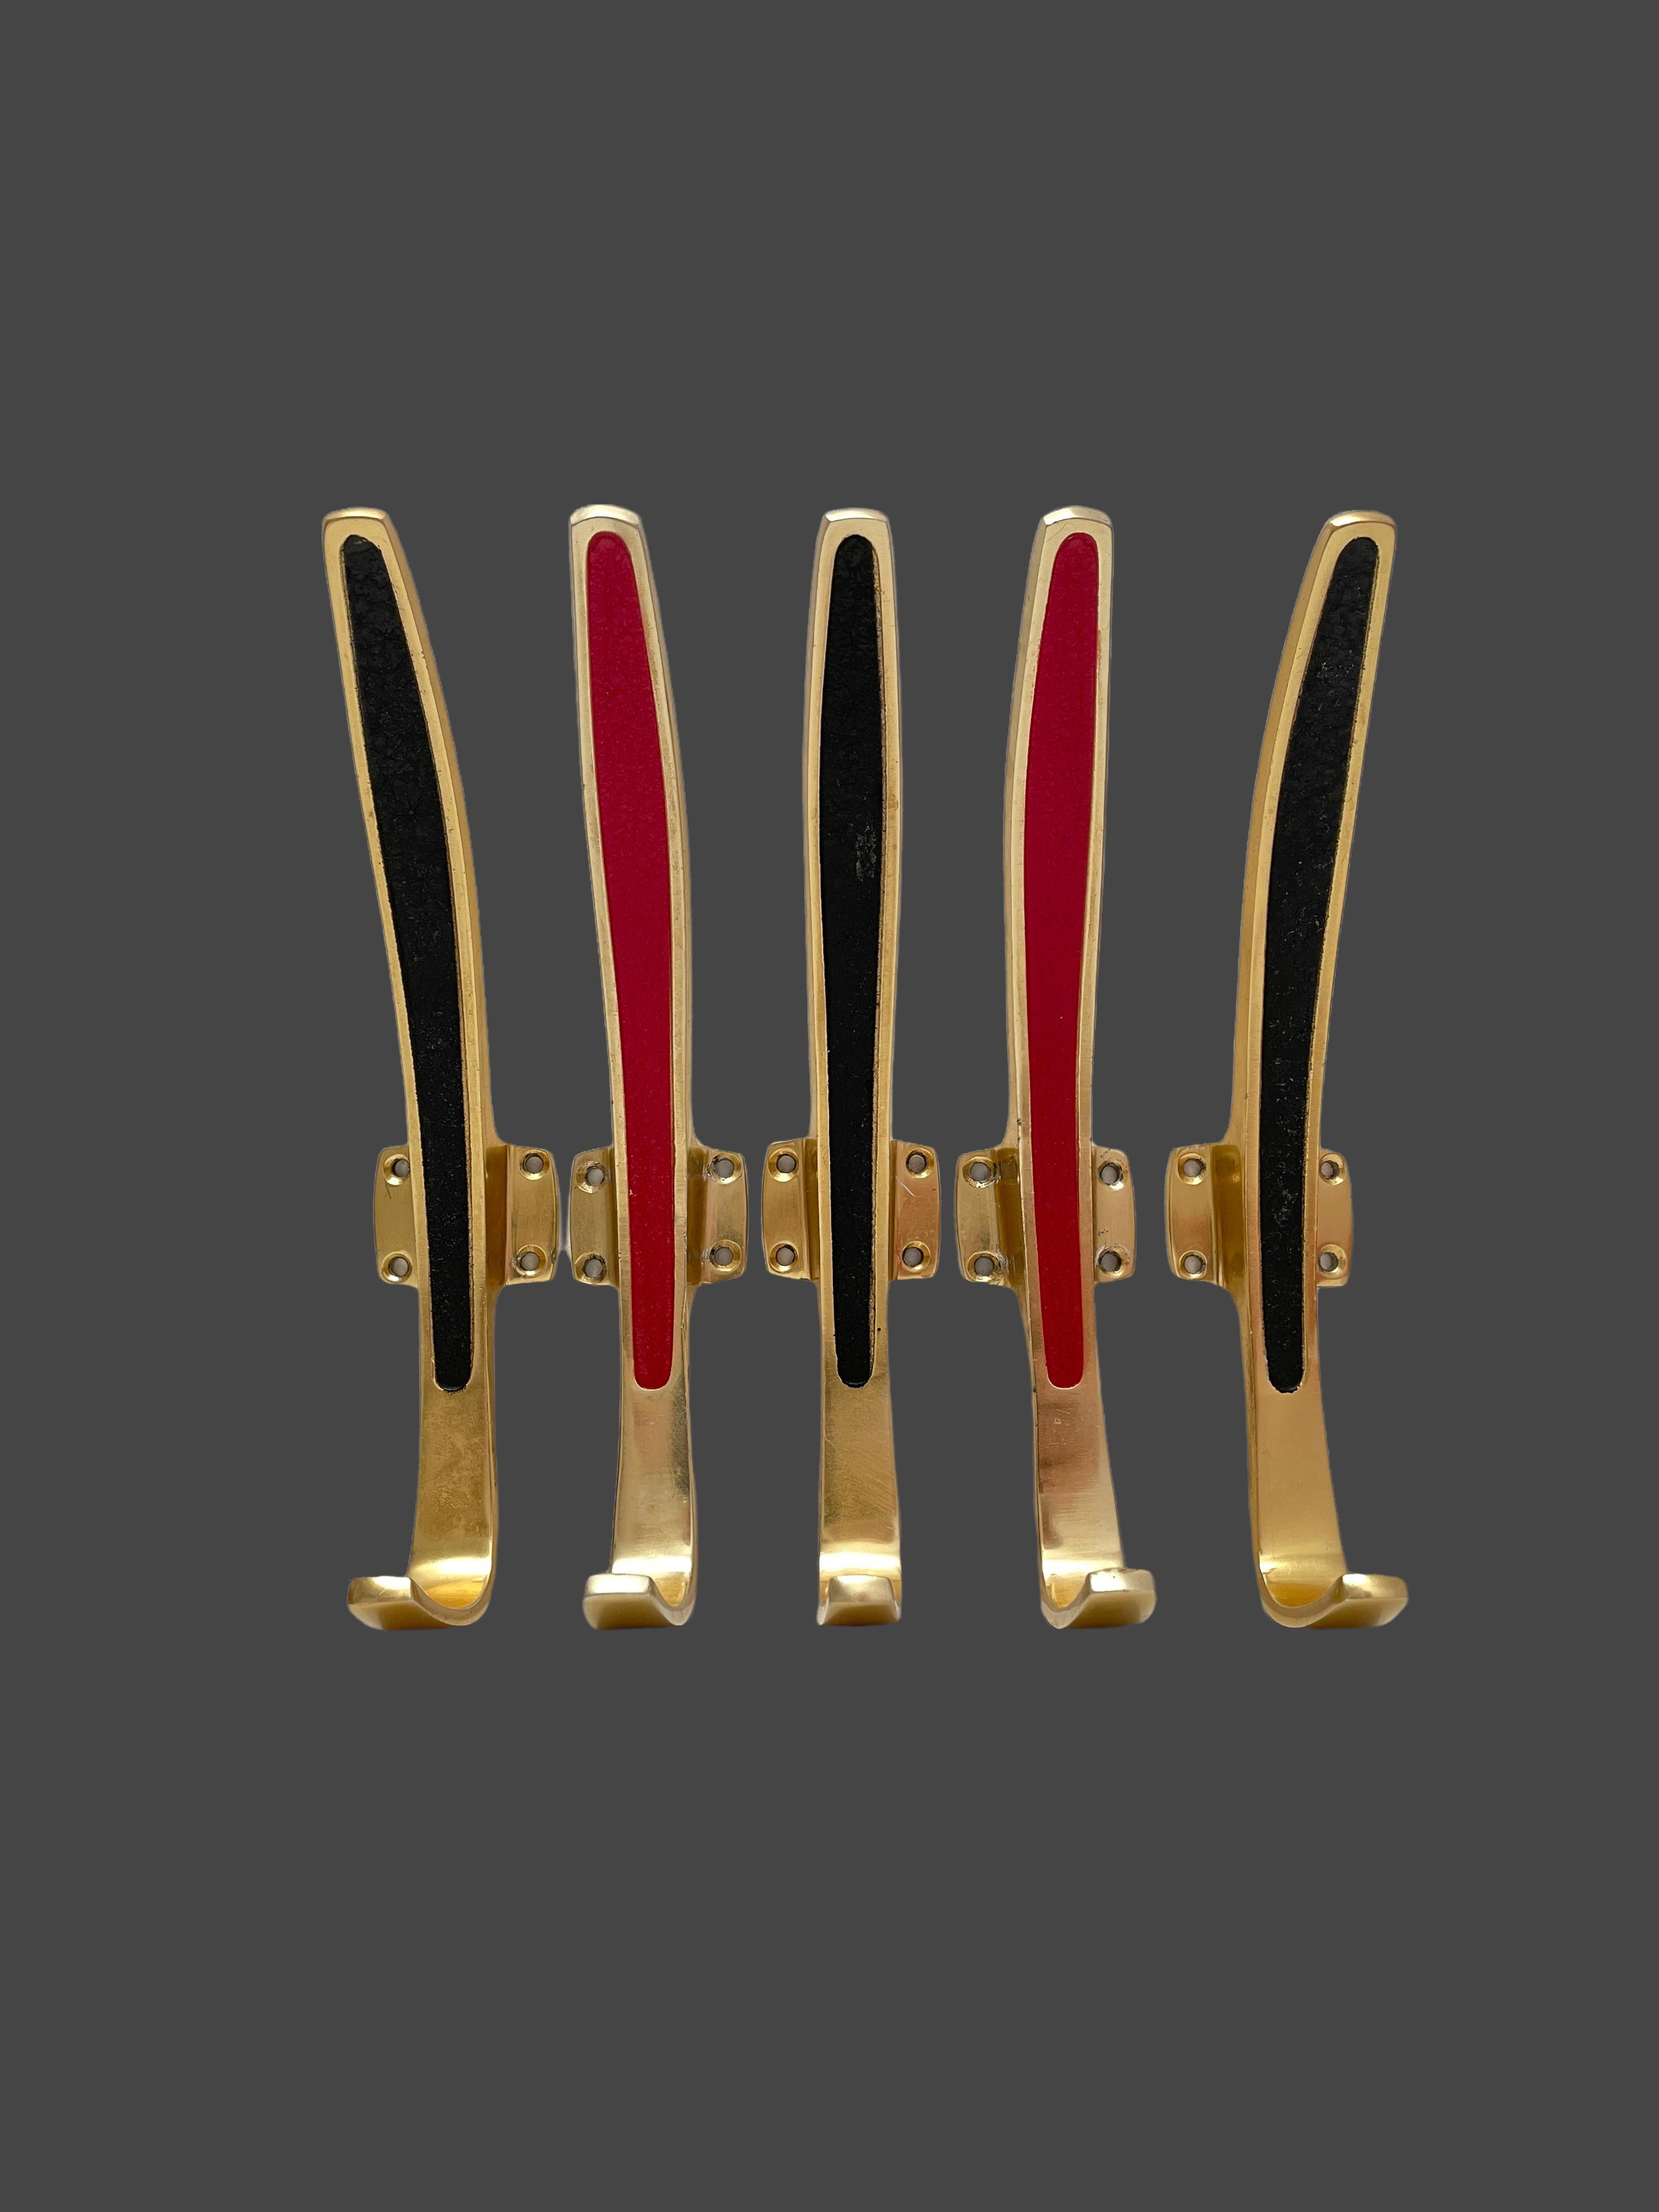 A set of five Bosse Baller Era style wall hooks, made in the 1950s. They are made of Brass with partly black or red lacquered paint. Wear of use, lovely patina, some use-lanes but this is old-age. Found at an Estate Sale in Nuremberg, Germany. A